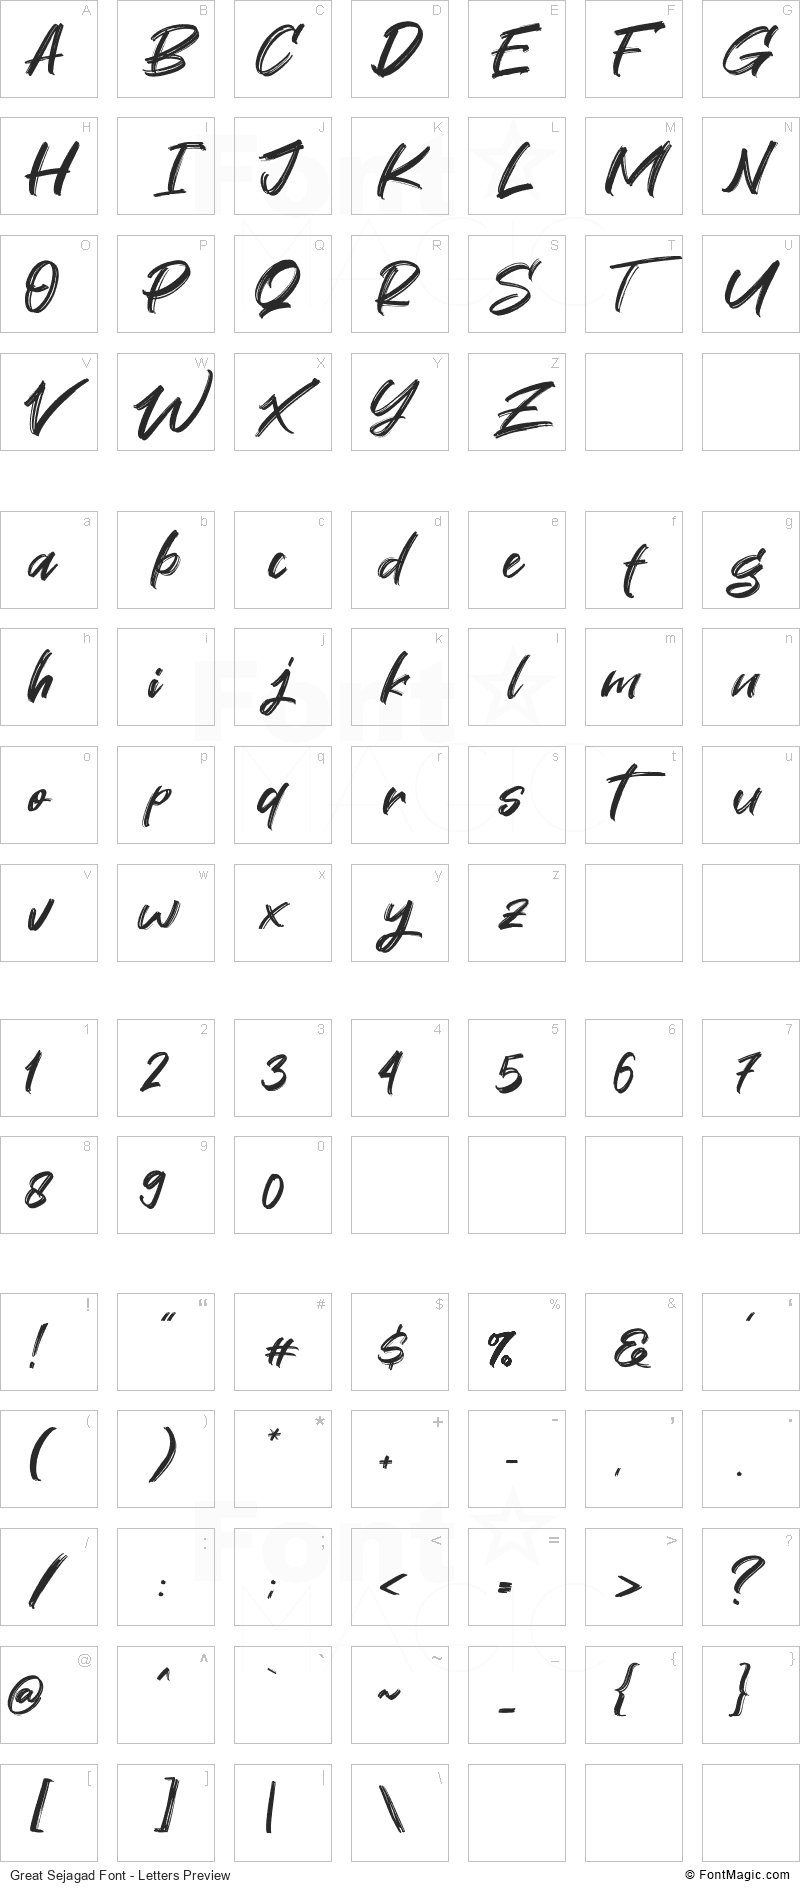 Great Sejagad Font - All Latters Preview Chart